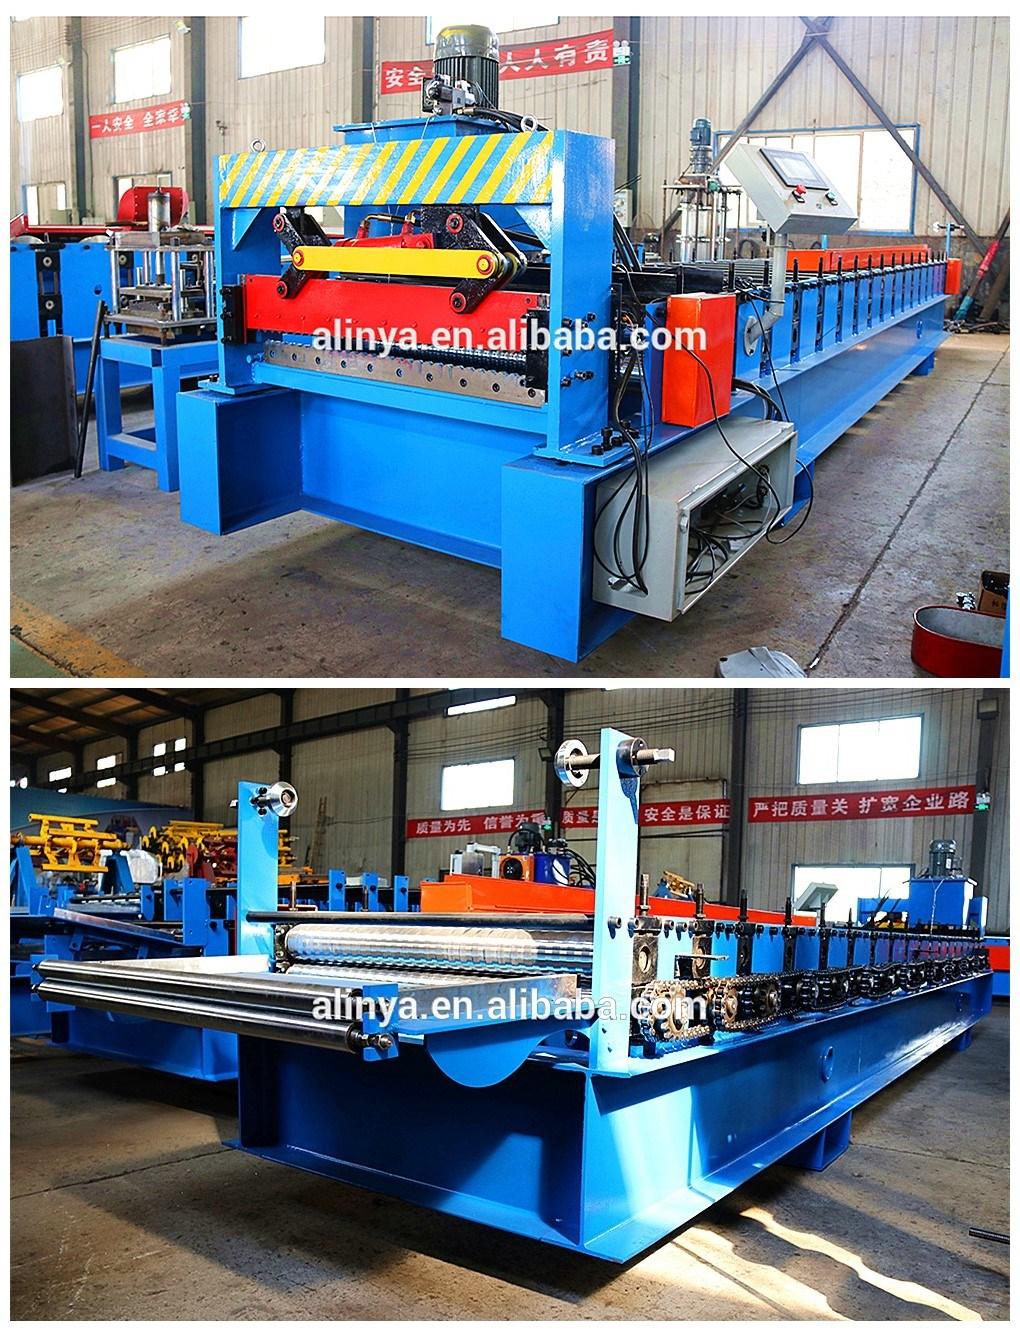 Corrugated Wall Panel Roll Forming Machine